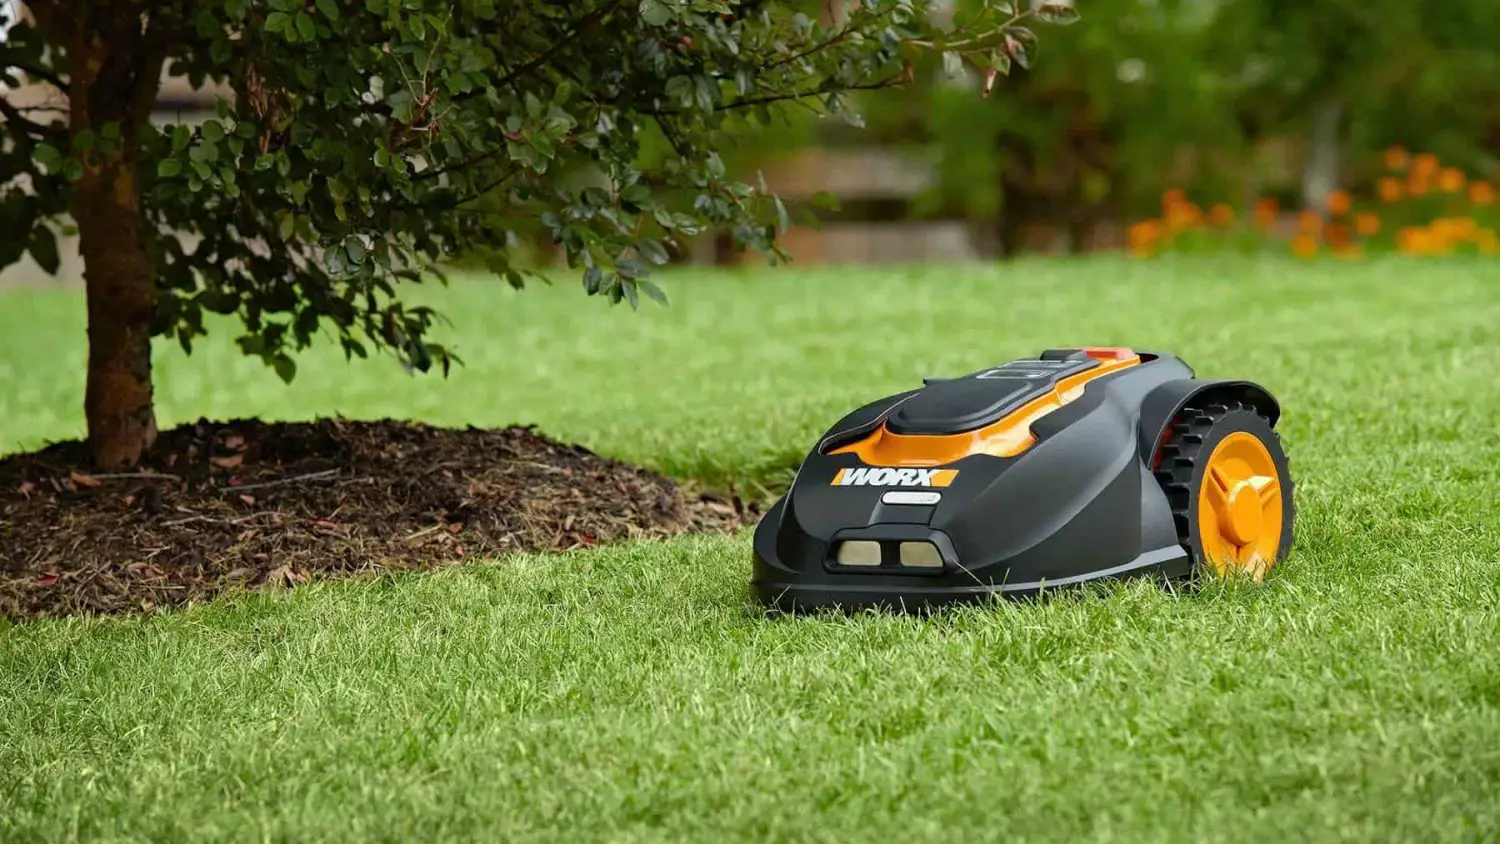 Best Robot Lawn Mower You Must Buy This Summer!